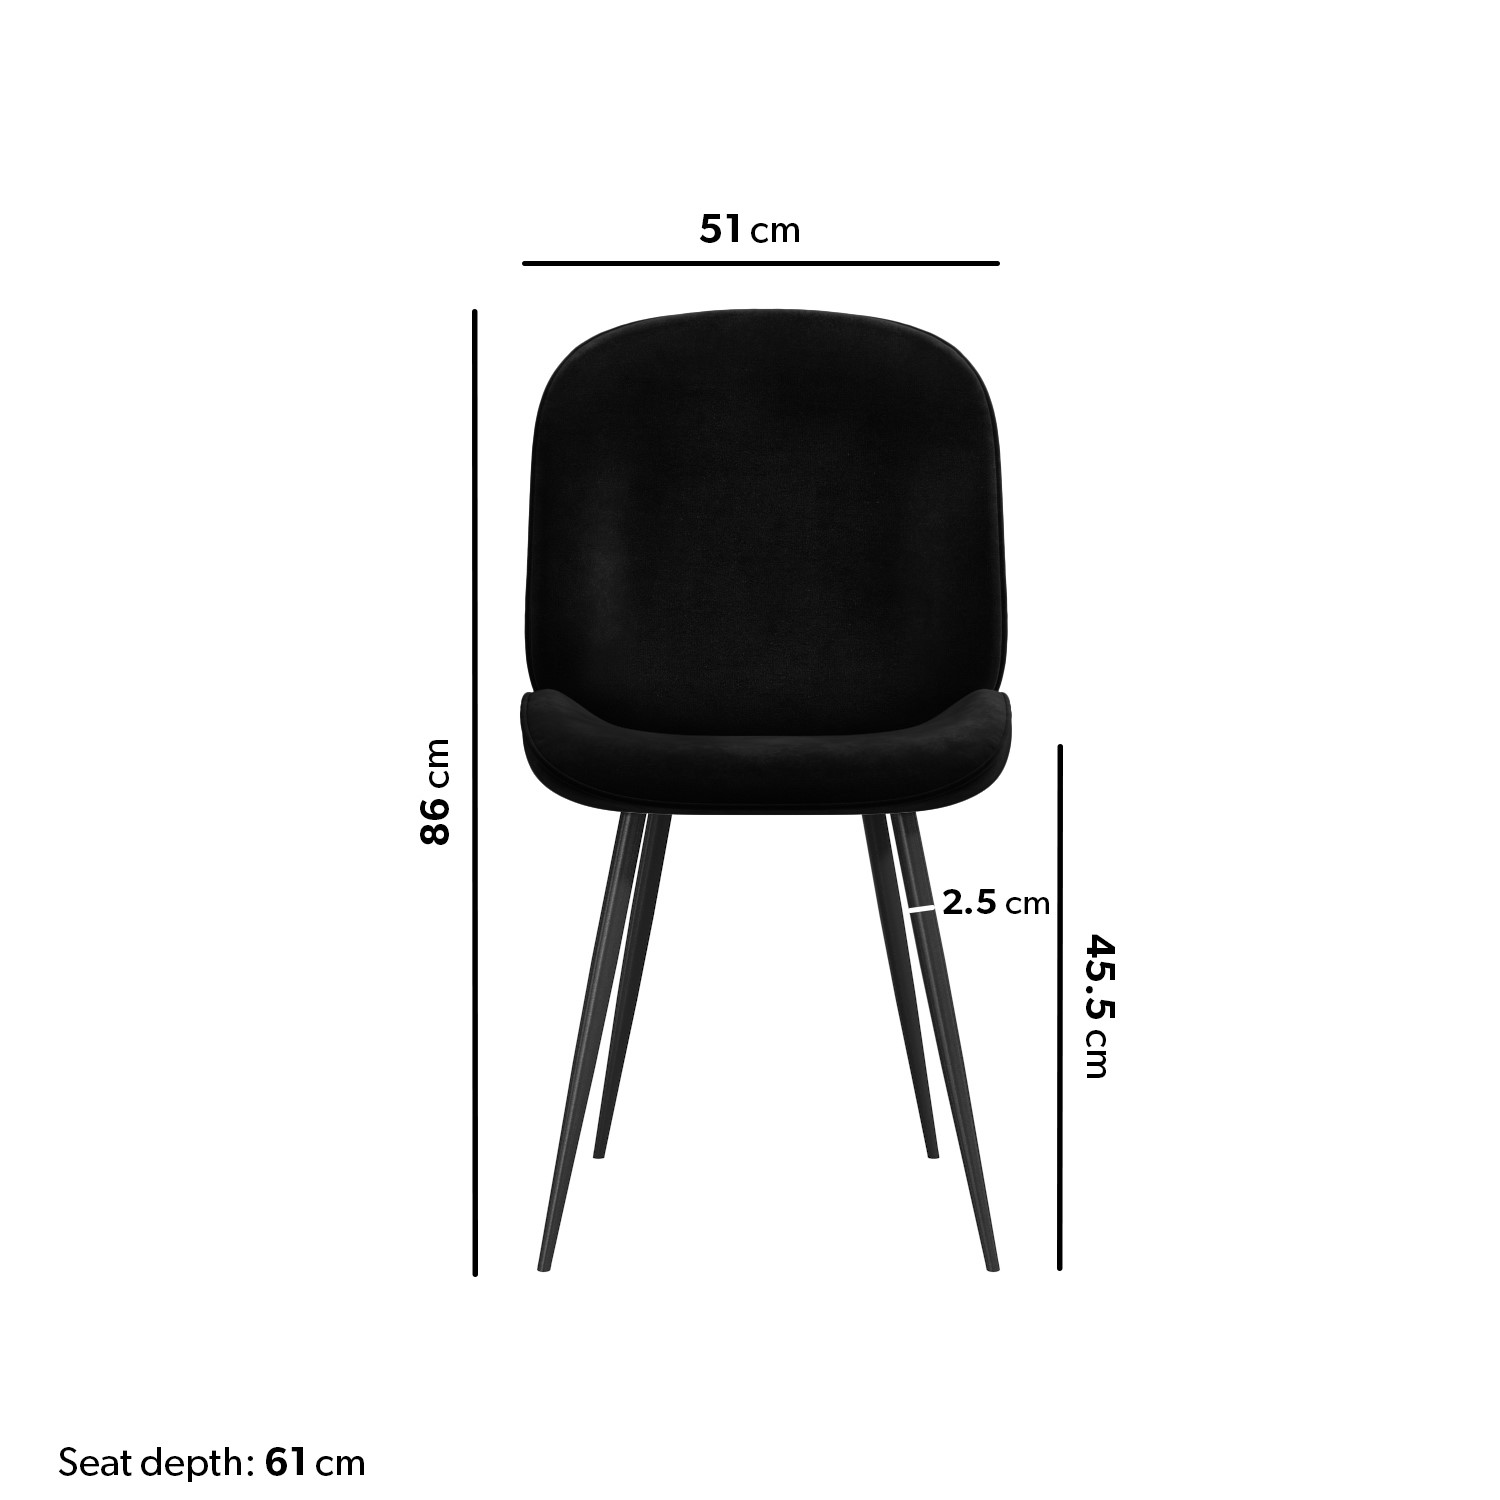 Read more about Set of 2 black velvet dining chairs with black legs jenna